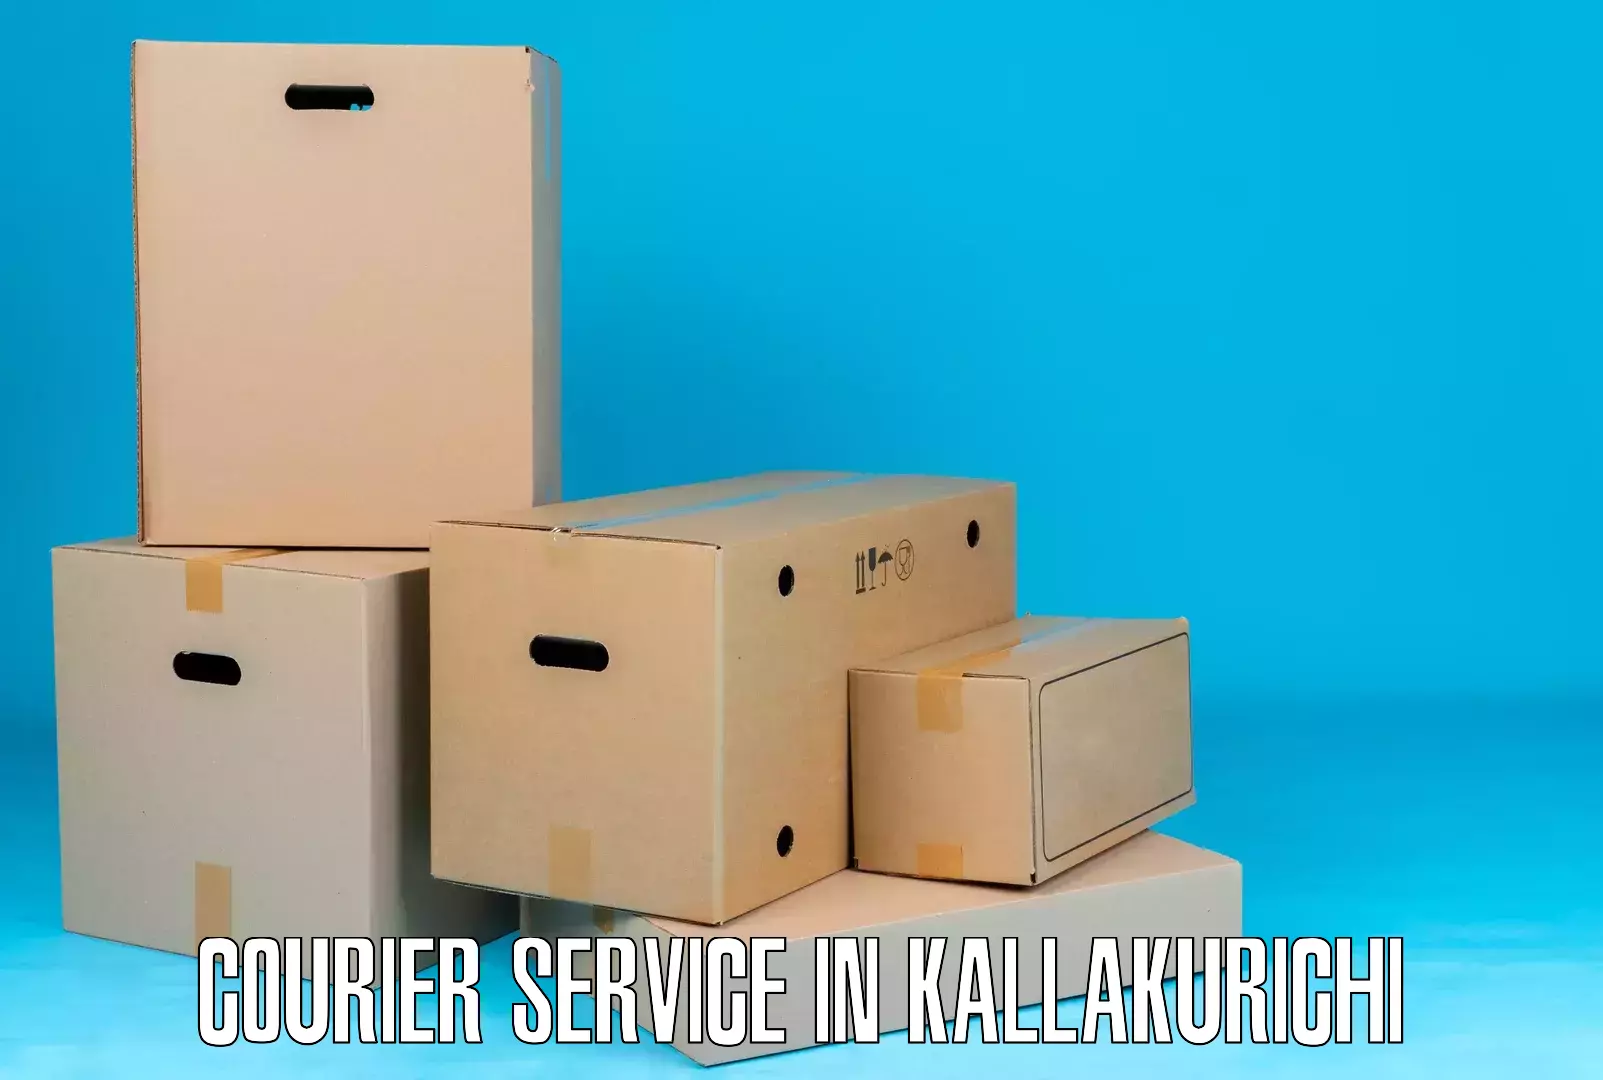 End-to-end delivery in Kallakurichi